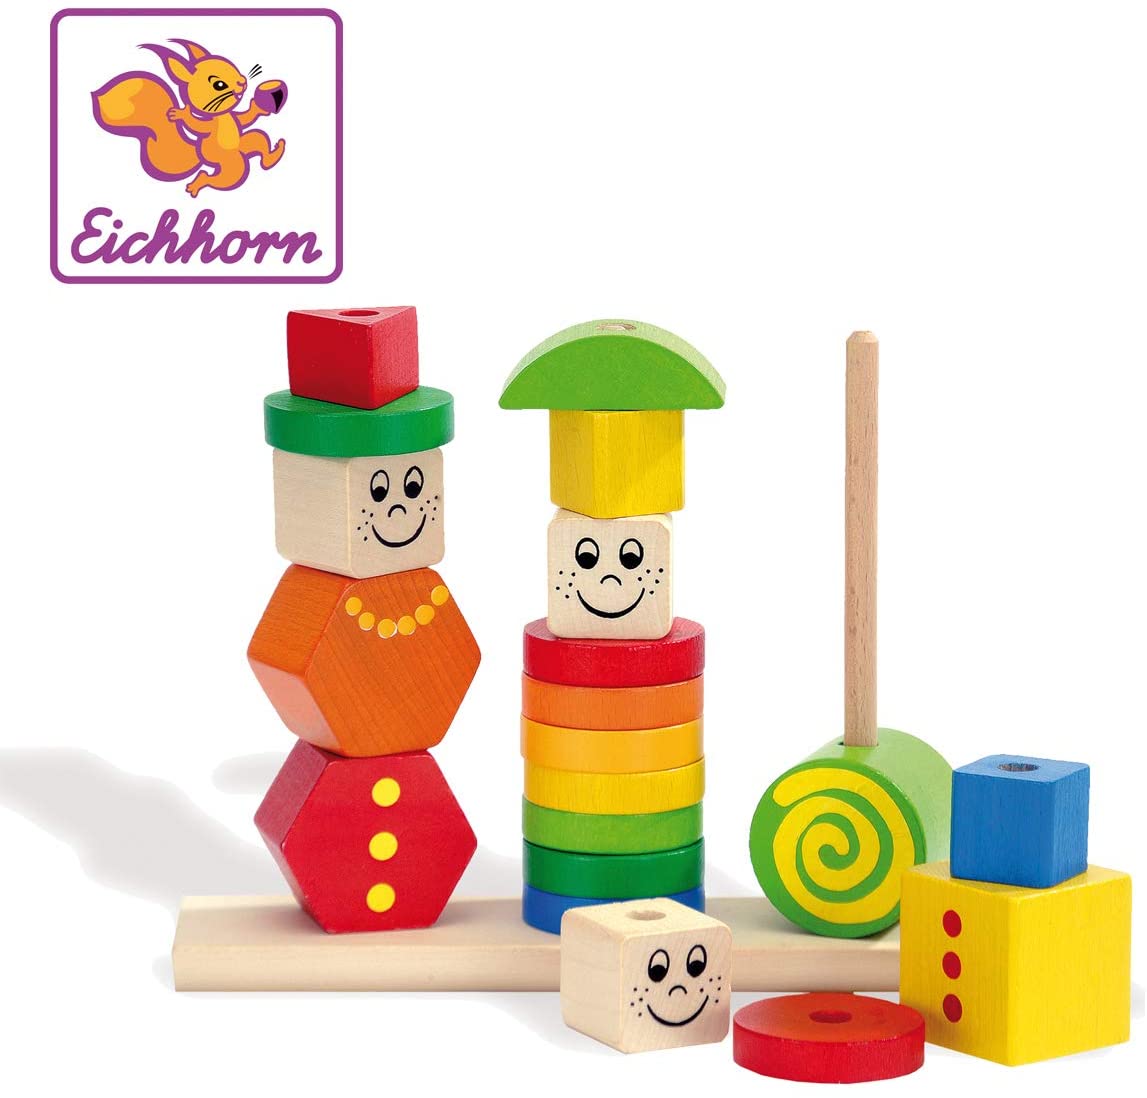 Eichhorn Wooden Figurines Jigsaw Puzzle, 20 Pieces, 3 Pegs with Plug-In Pieces, High-Quality Beech Wood, Made in Germany, for Children 12 Months and Older